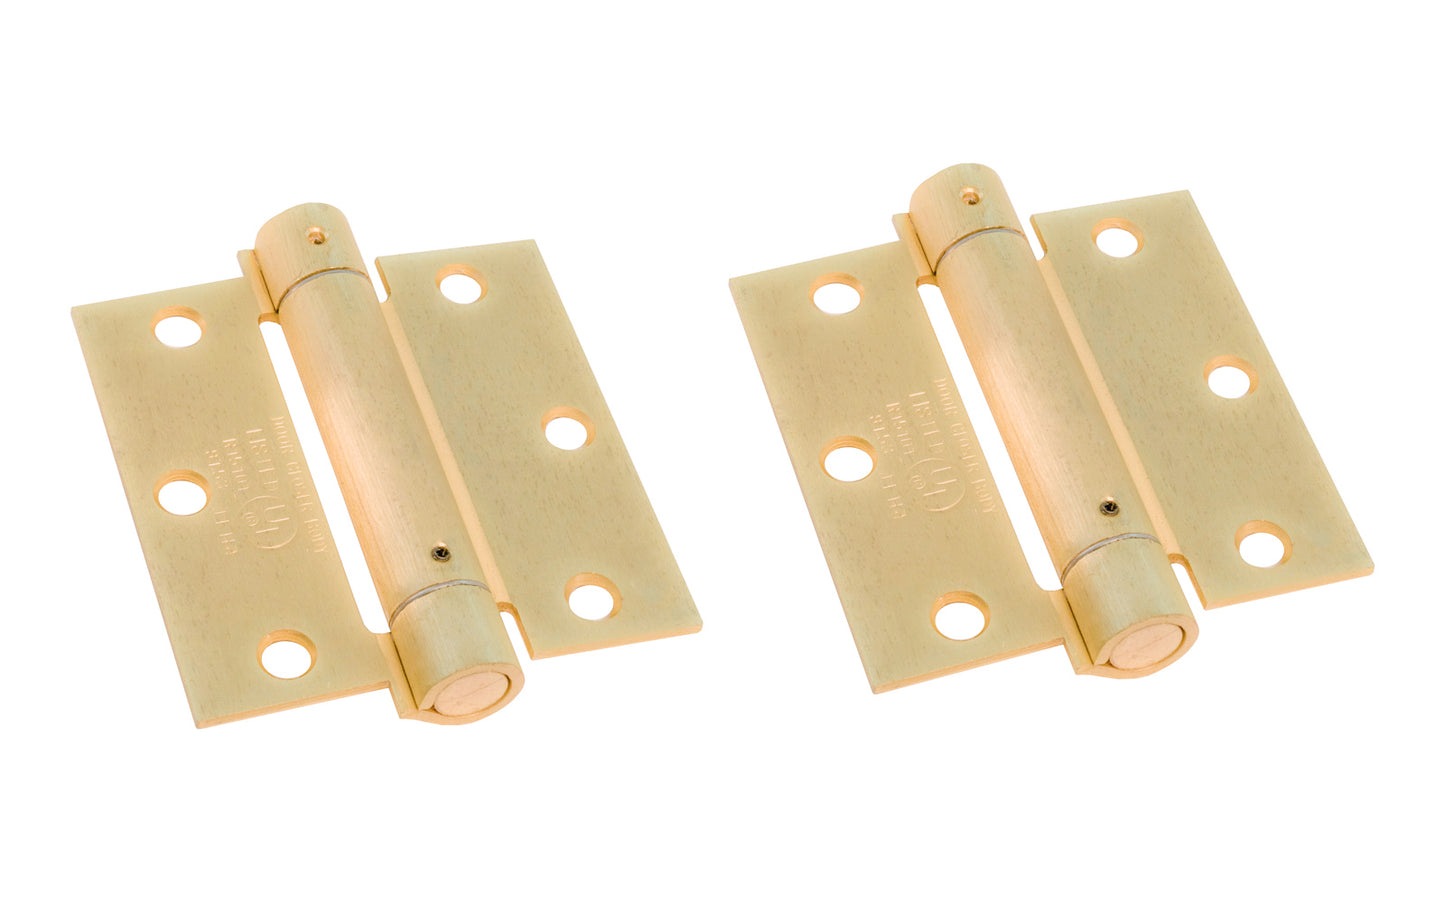 3-1/2" Brass Finish Spring Hinge is designed for hanging self-closing doors in basements, stairways, garages, & entrances, etc. Can be used in residential, commercial, & apartment buildings. Hinge is UL approved. Closing speed is adjustable. Fits standard hinge cutout. Square corner automatic door-closing spring hinge. Satin Brass Finish on cold-rolled steel material. Sold as two hinges in pack.  Ultra Hardware No. 35341